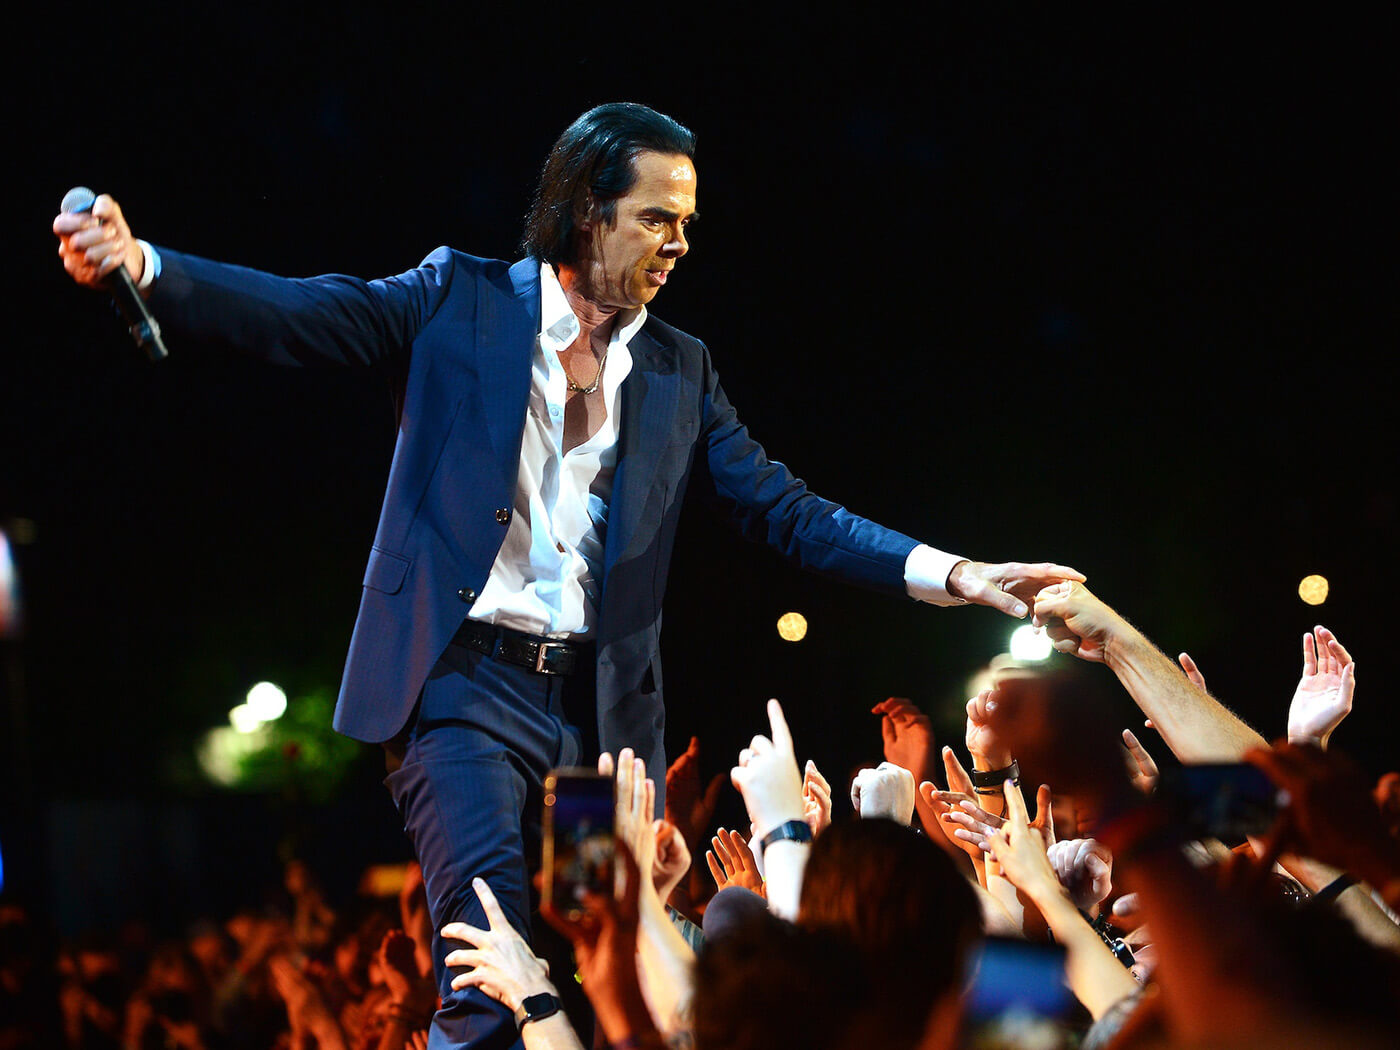 Nick Cave performing at All Points East Festival 2022